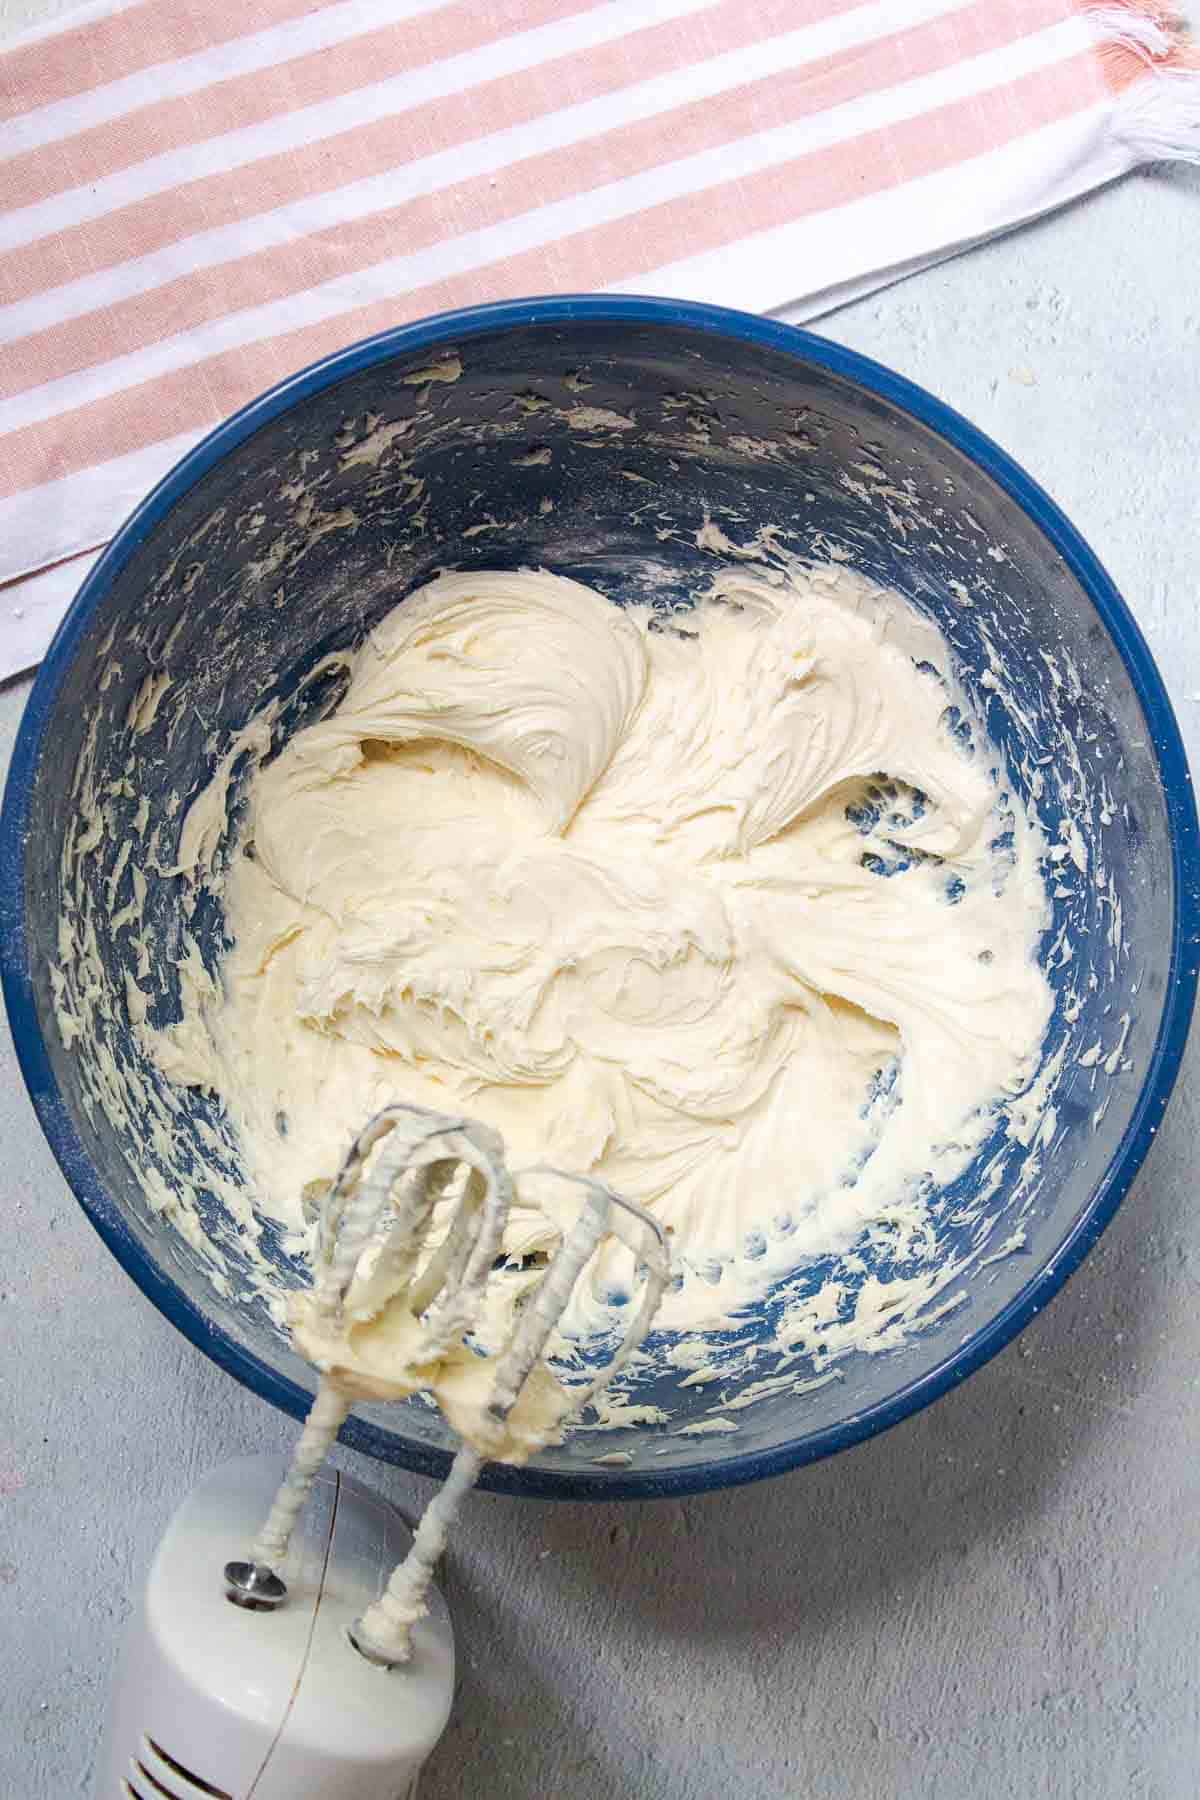 The powdered sugar is fully mixed into the cream cheese mixture